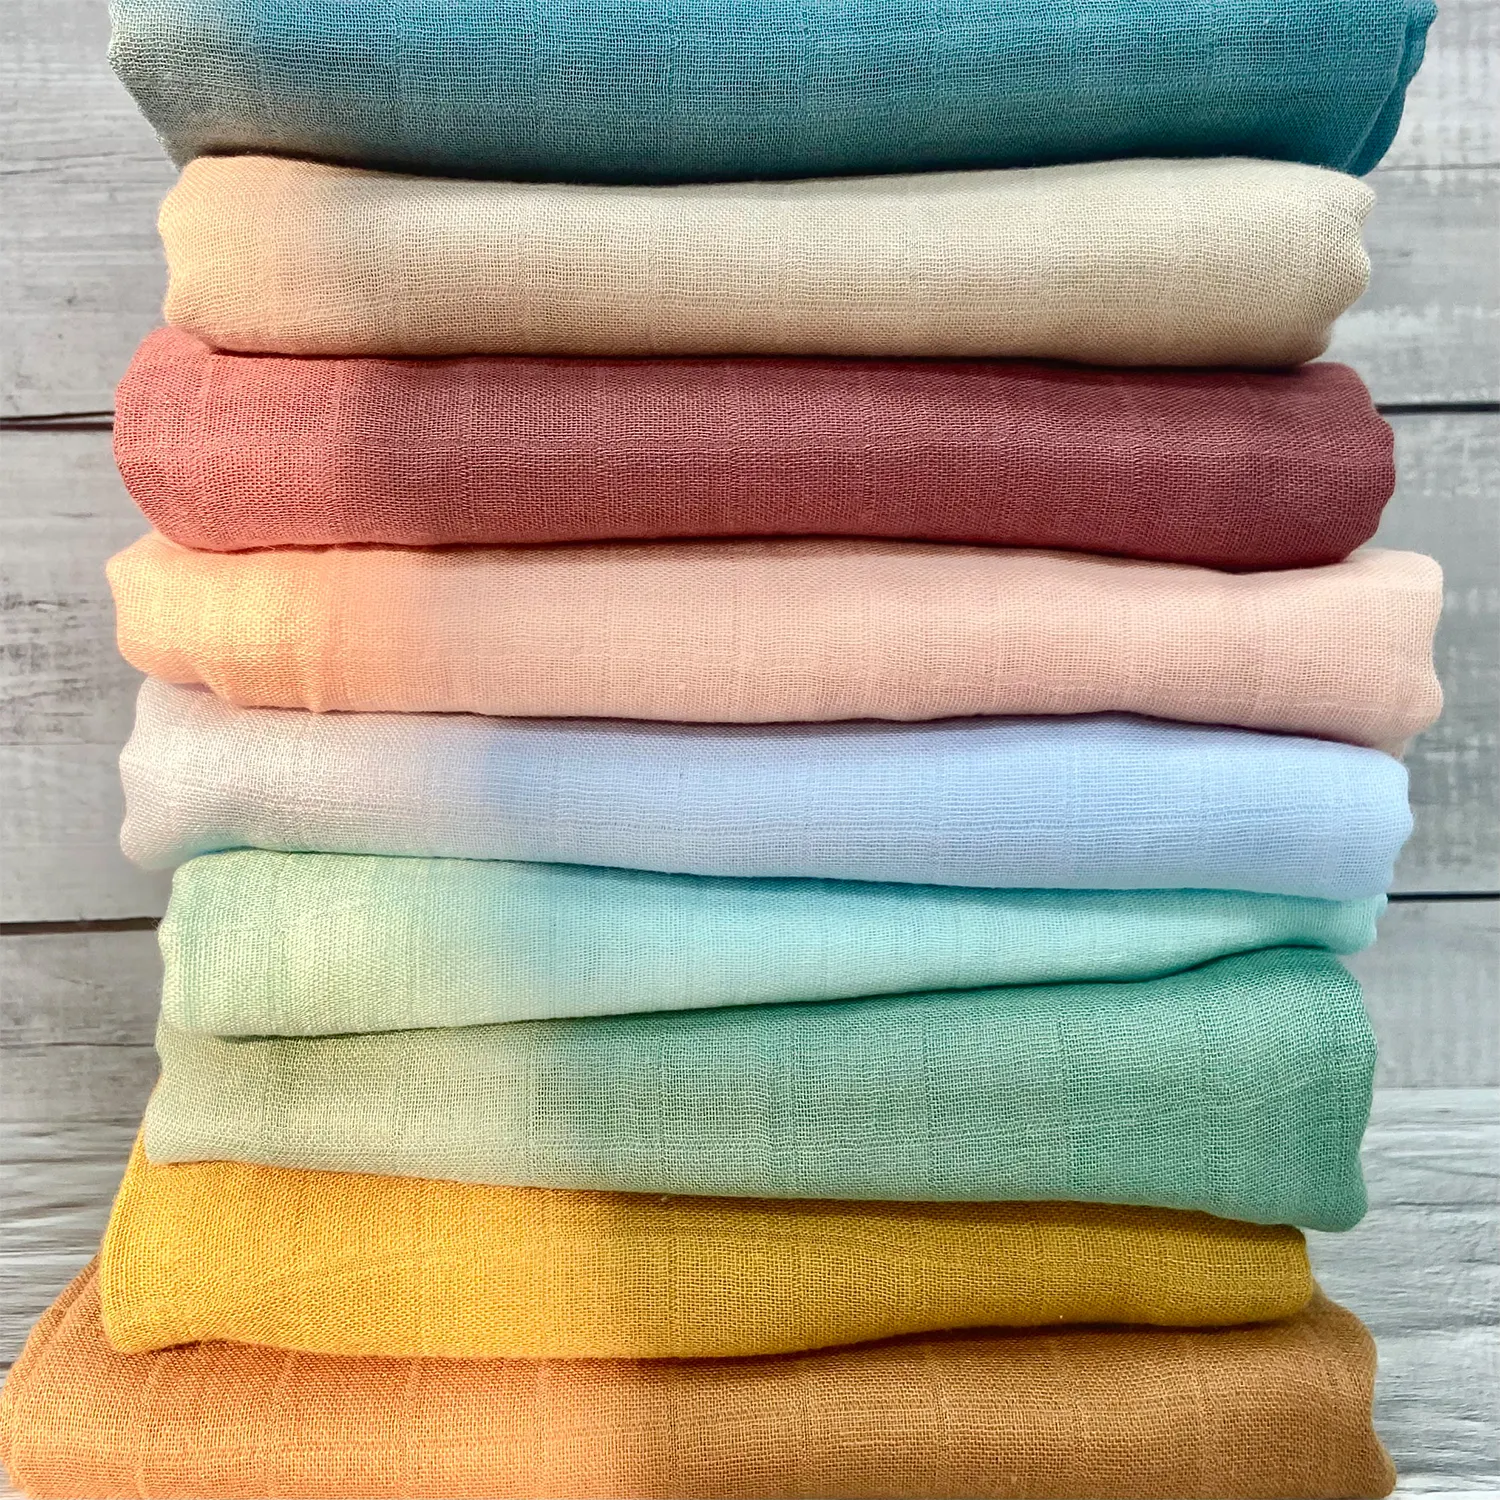 Wholesale Baby Organic Muslin Swaddle Wrap Solid Color Newborn 70% Bamboo 30% Cotton 47"x47" Muslin Swaddle Receiving Blankets